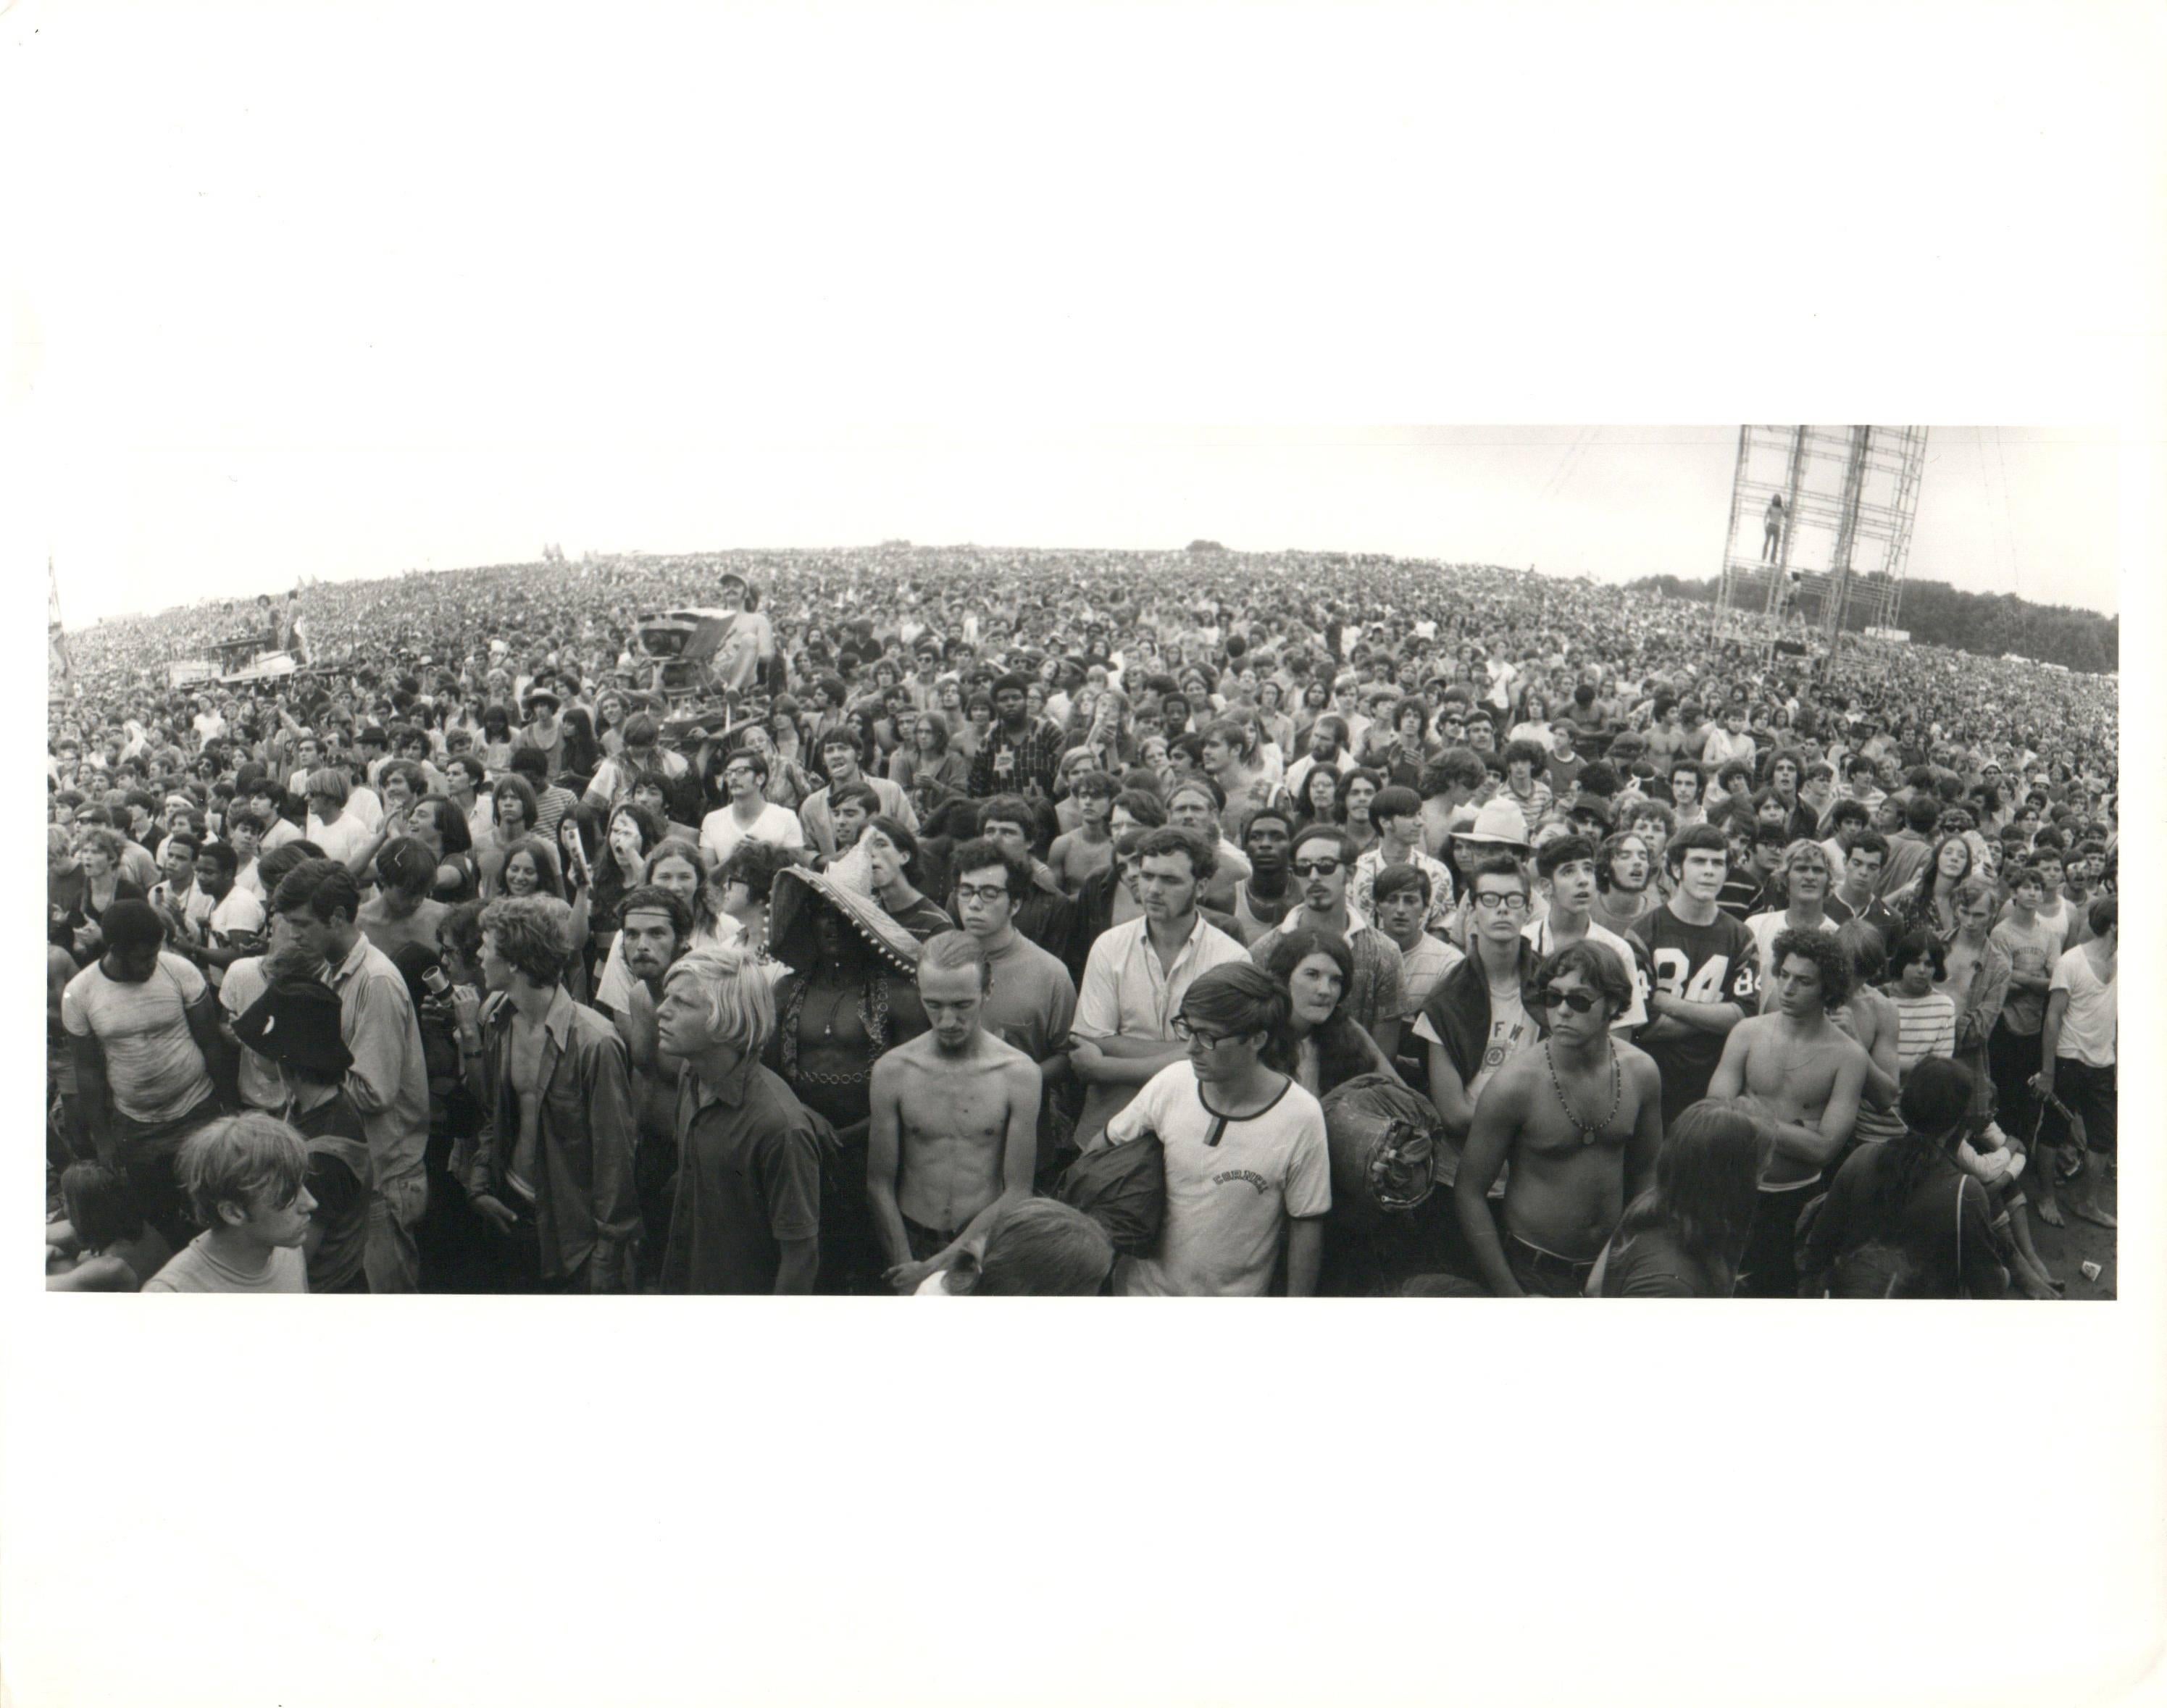 Unknown Black and White Photograph - The Crowd at Woodstock Vintage Original Photograph